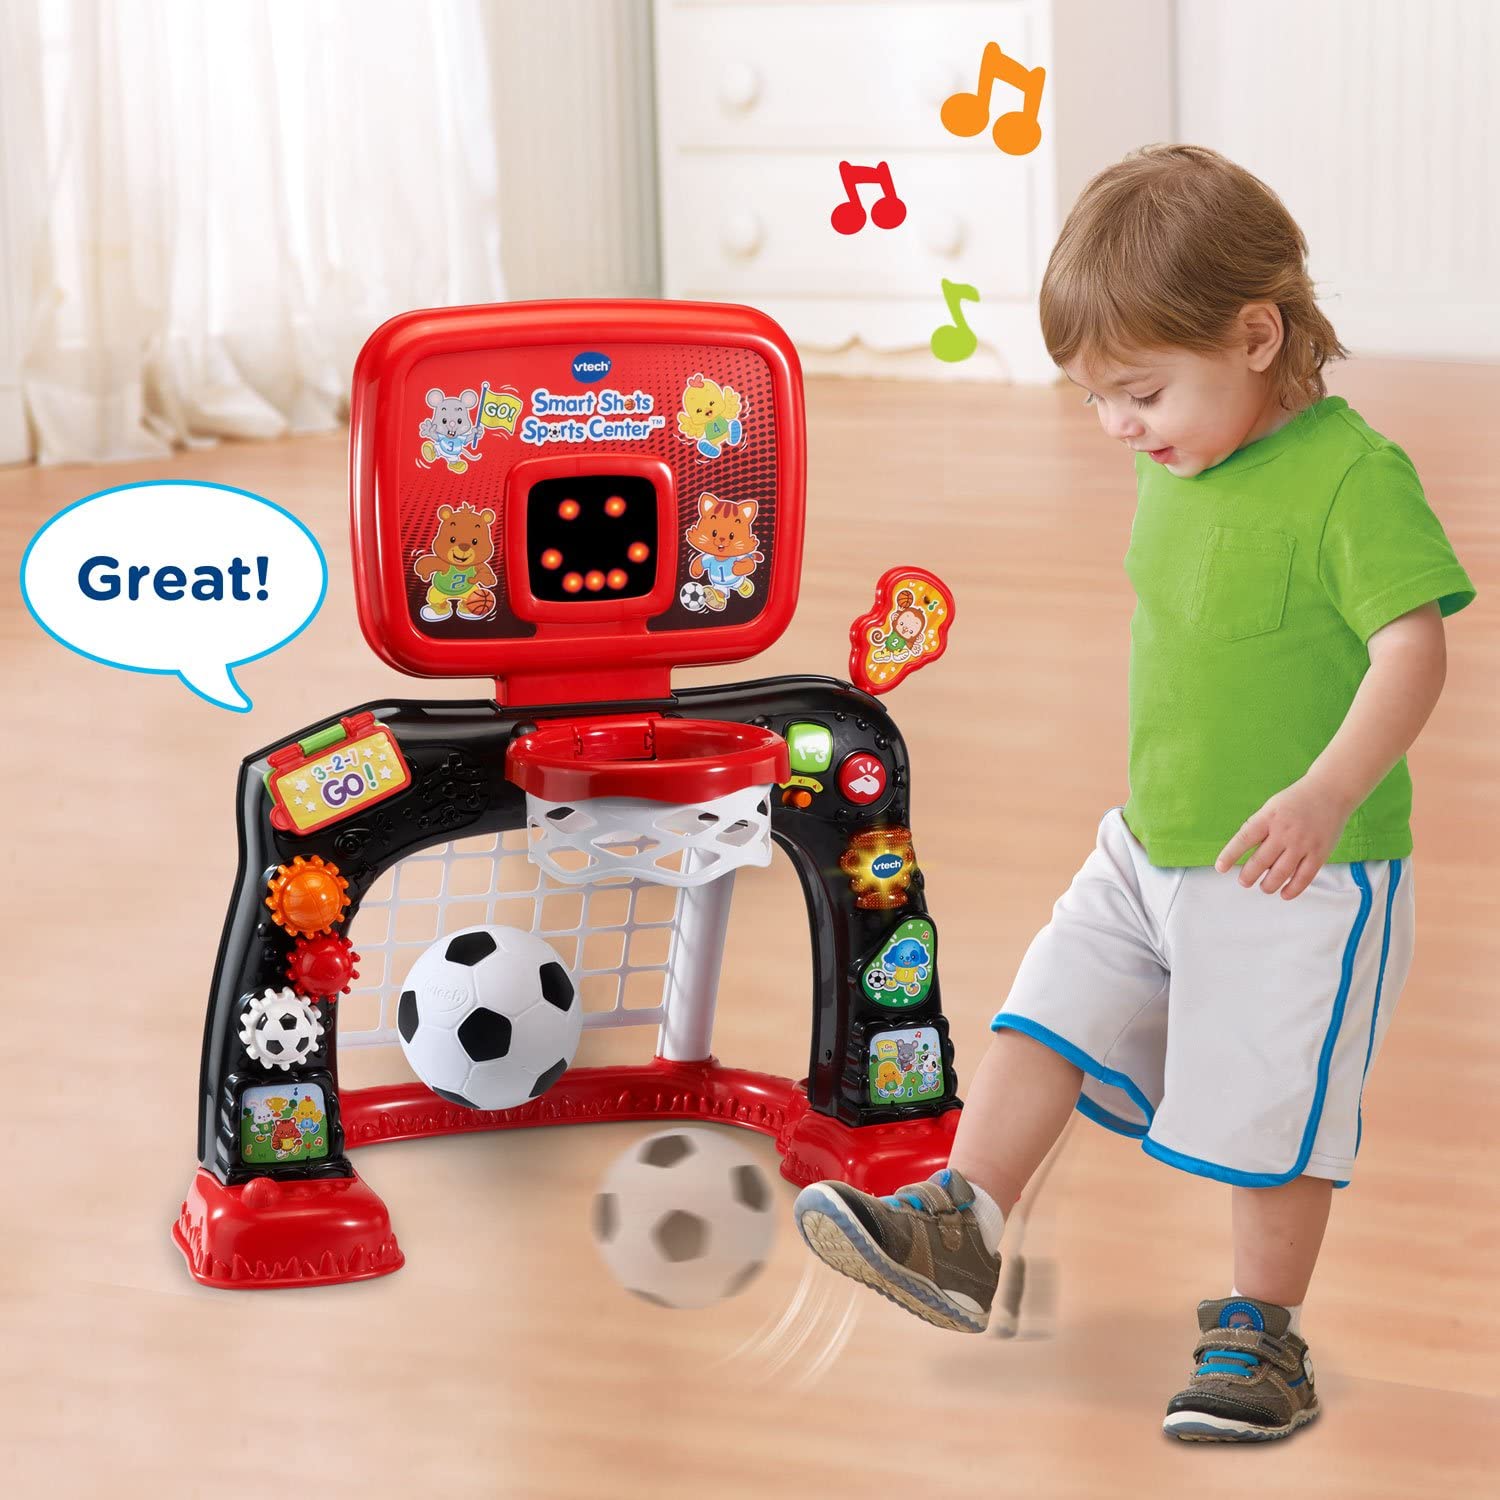 VTech Smart Shots Sports Center, Red - Learn About Shapes, Numbers and More